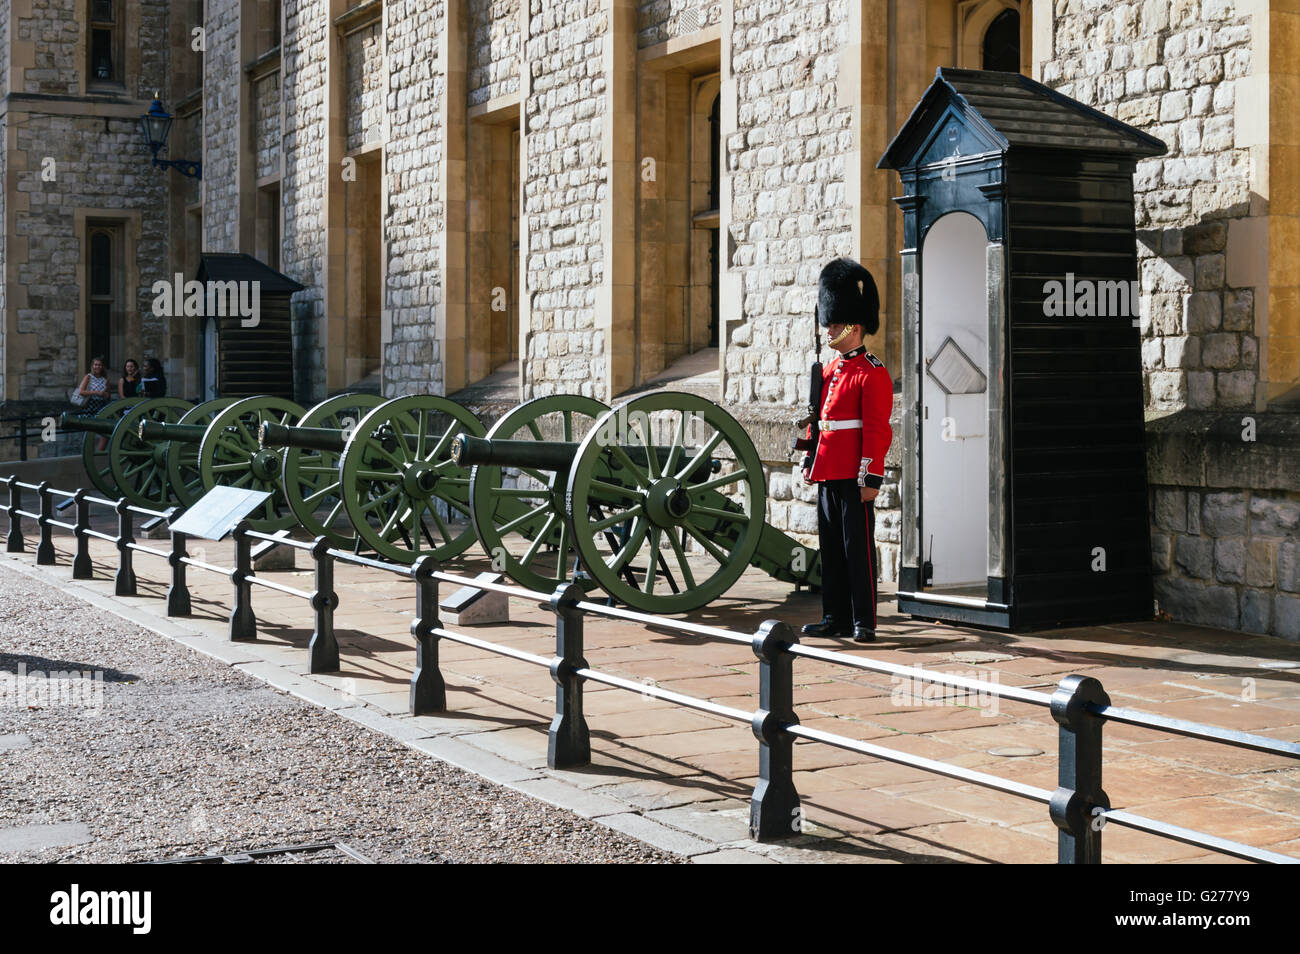 LONDON, UK - AUGUST 21, 2015:  Queen's Guard and guns - Tower of London. Stock Photo